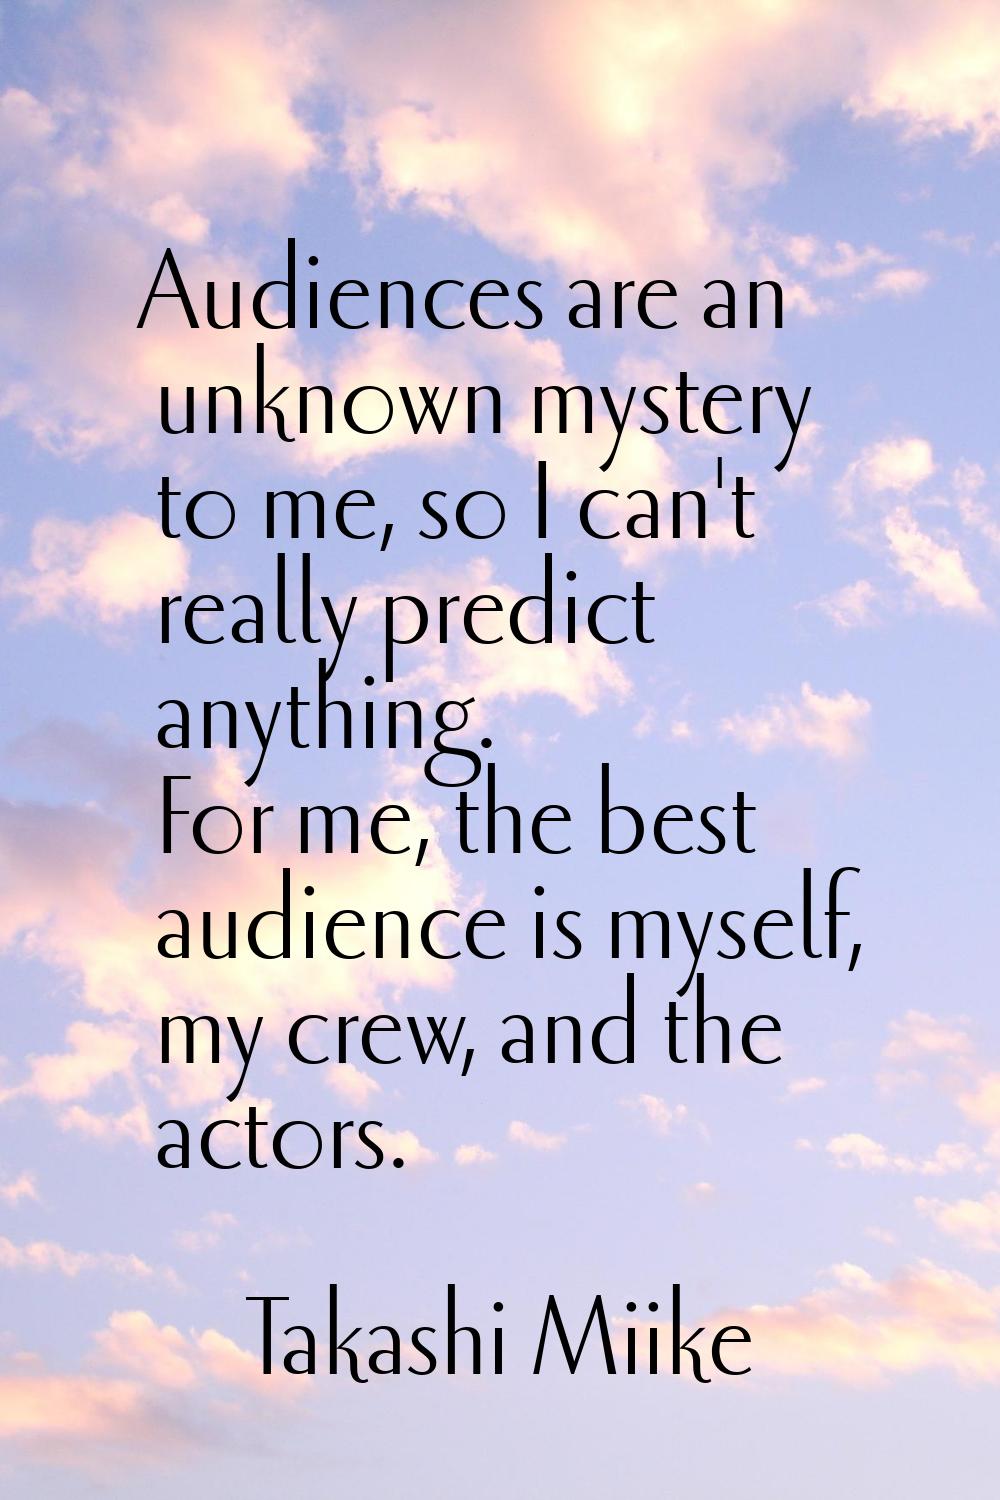 Audiences are an unknown mystery to me, so I can't really predict anything. For me, the best audien